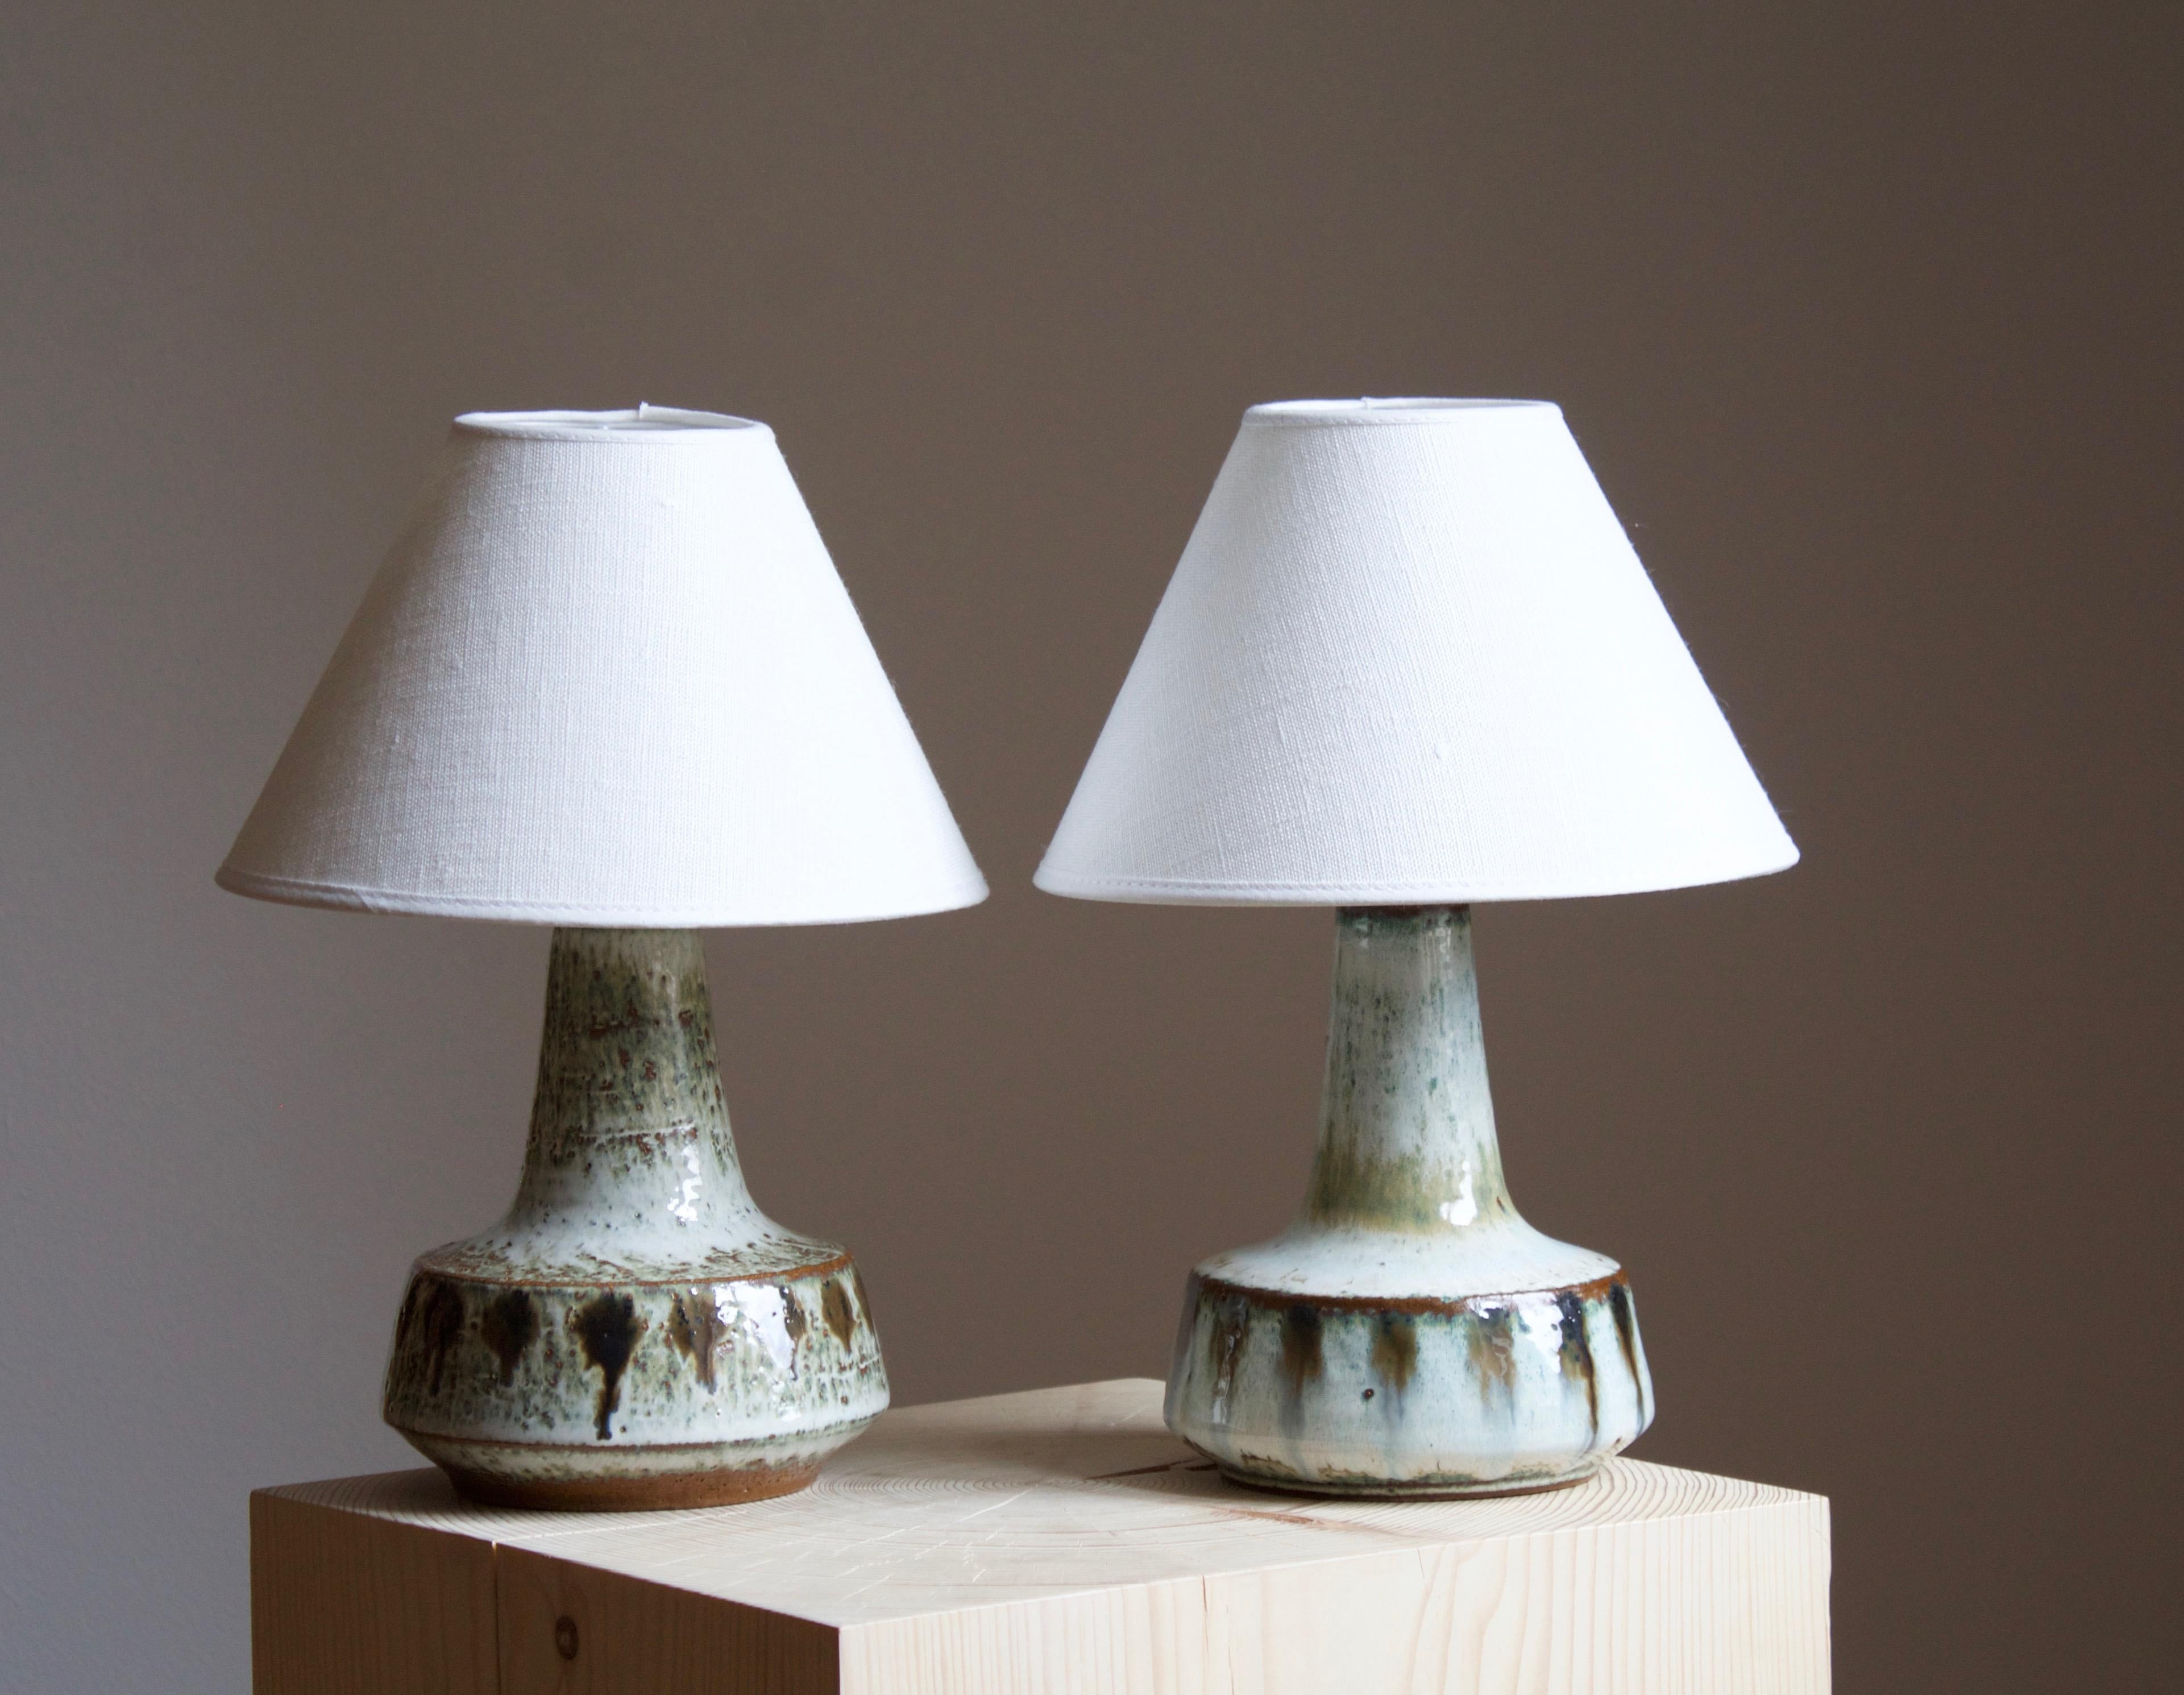 A pair of table lamps produced by Søholm Keramik, located on the island of Bornholm in Denmark. Features a highly artistic glazed and incised decor. 

Sold without lampshade. Stated dimensions exclude the lampshade. Height includes